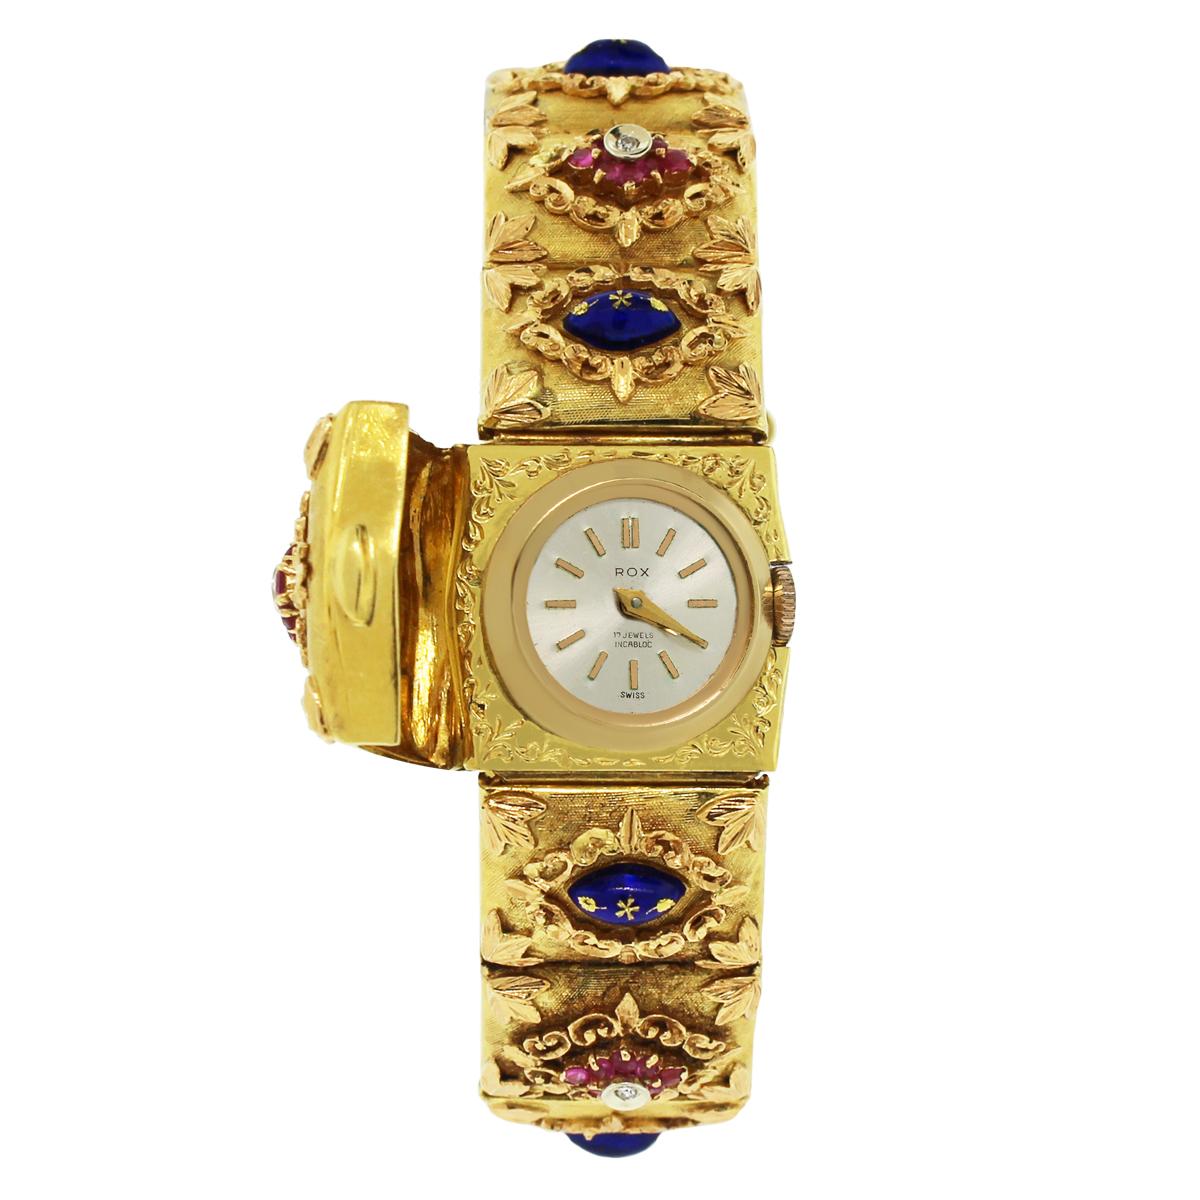 Case Material: 18k yellow gold
Case Diameter: 16mm
Dial: Off-white dial with yellow gold hands and hour markers. When closed, there is a diamond in the center of the bracelet that is approximately 0.10ctw
Bezel: 18k Yellow gold bezel
Bracelet: 18k